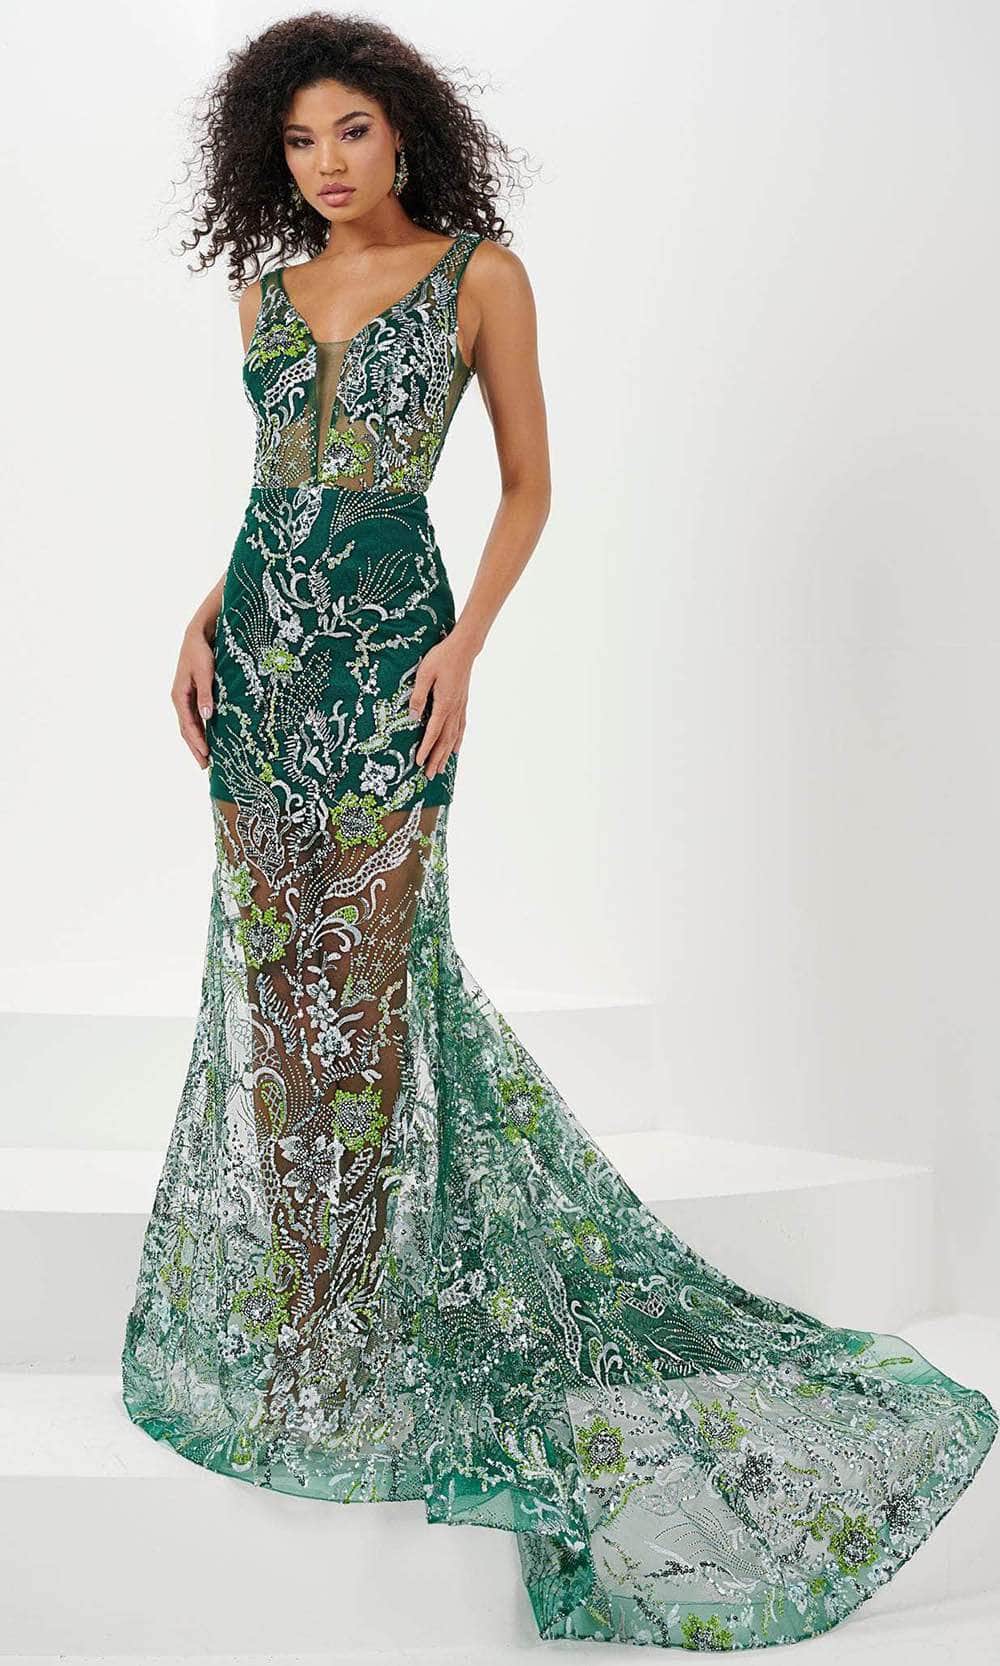 Panoply 14172 - Sequin Illusion Mermaid Evening Gown Evening Dresses 0 / Green Multi